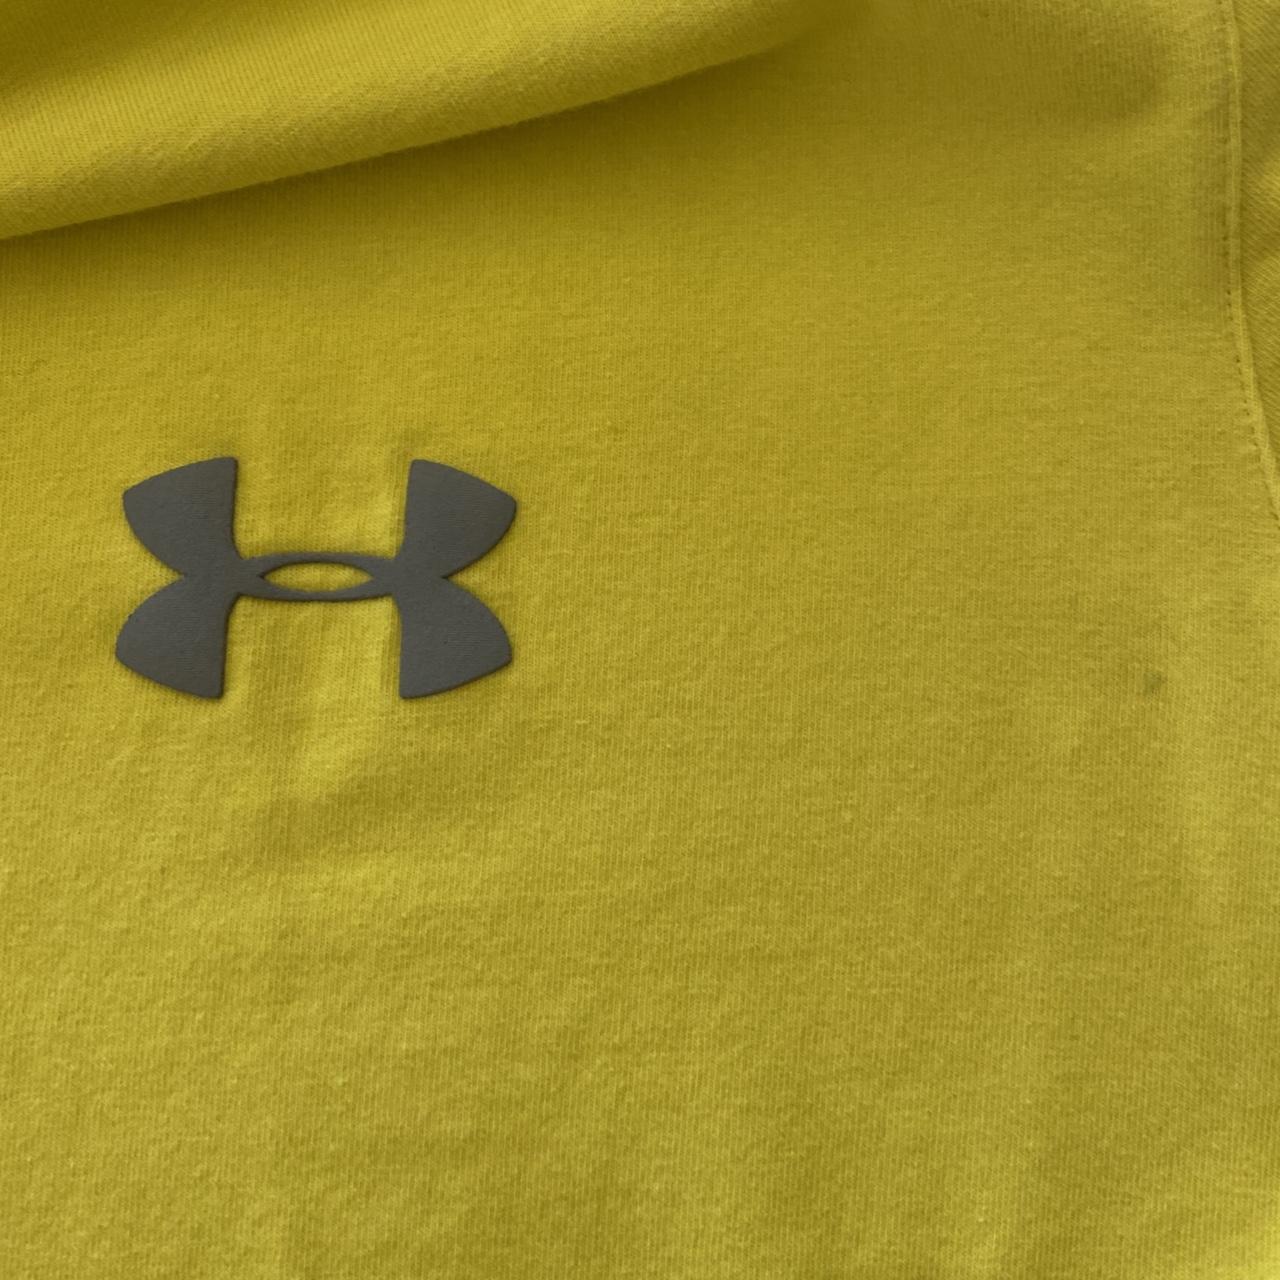 Yellow Under Armour tshirt - Great condition - - Depop